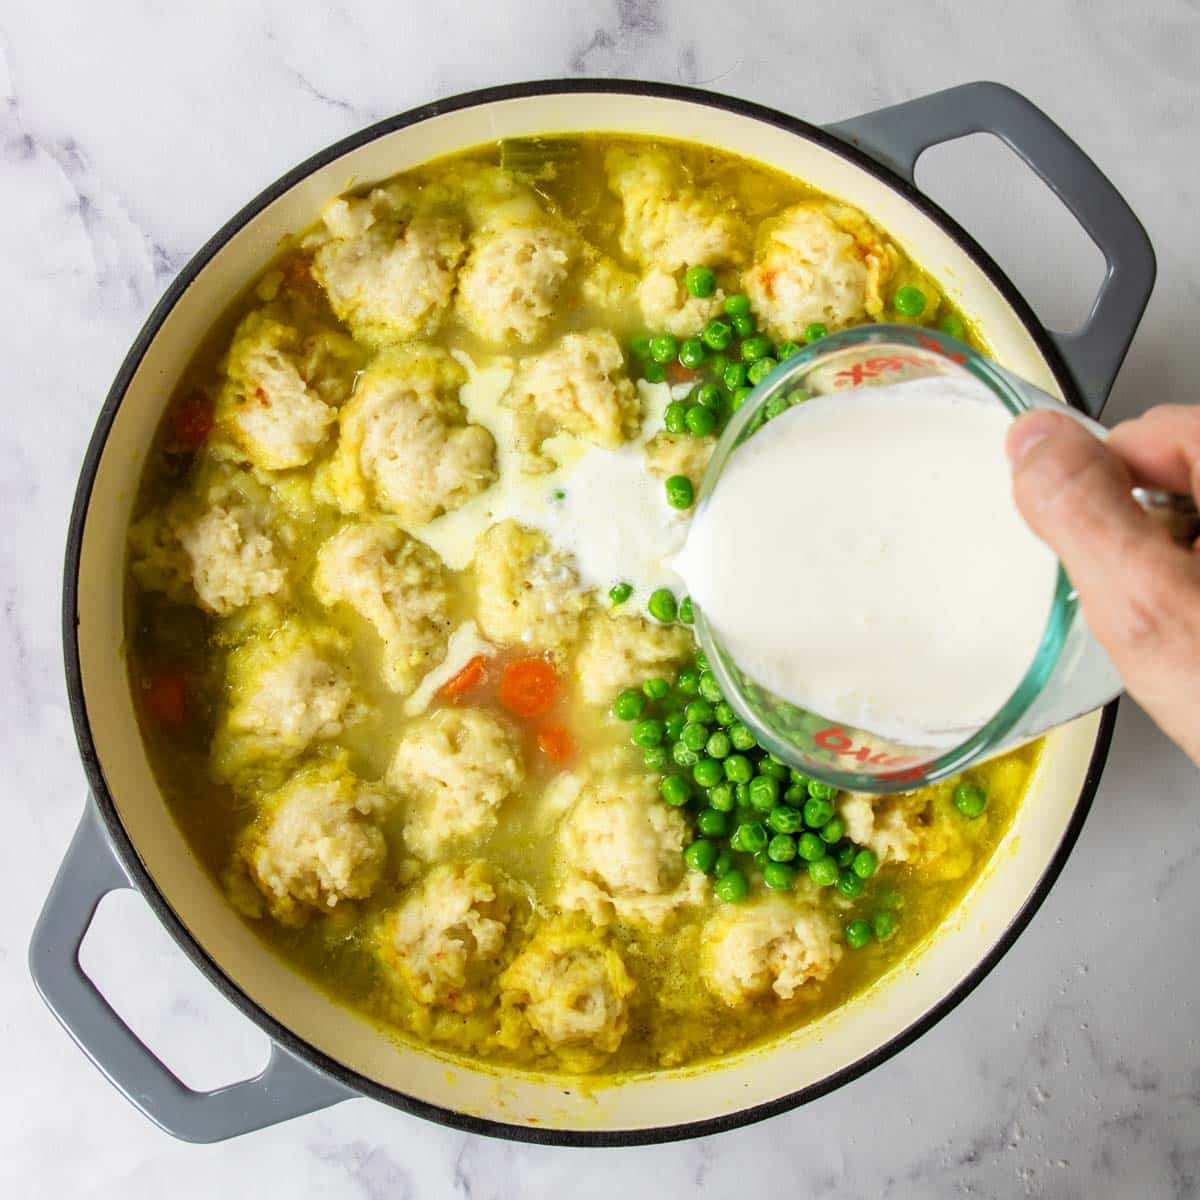 frozen peas and heavy cream being added to chicken and dumplings